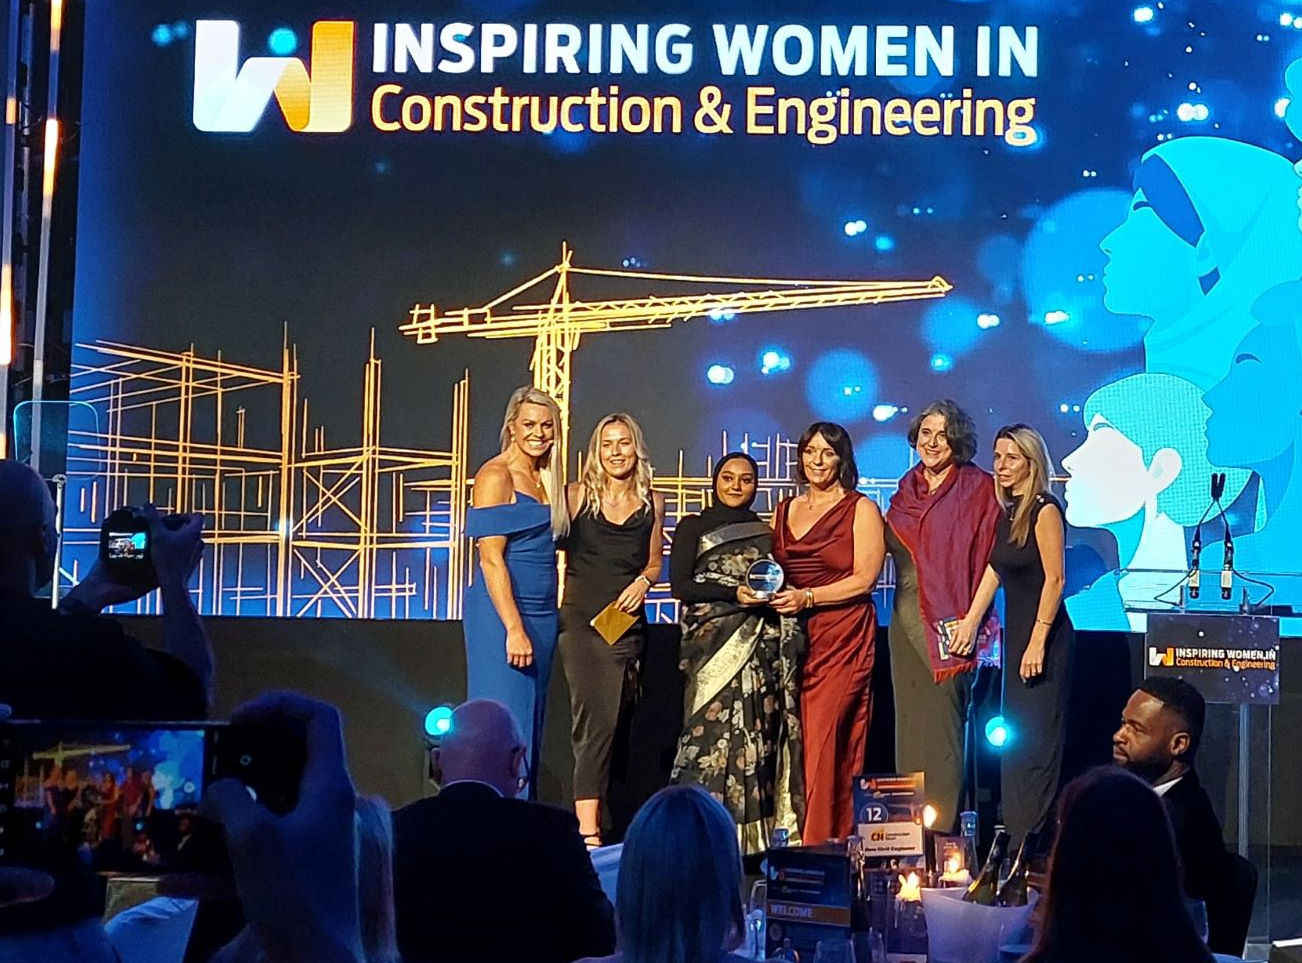 Inspiring Women in Construction awards winning team on stage 3 mid cropped.jpg